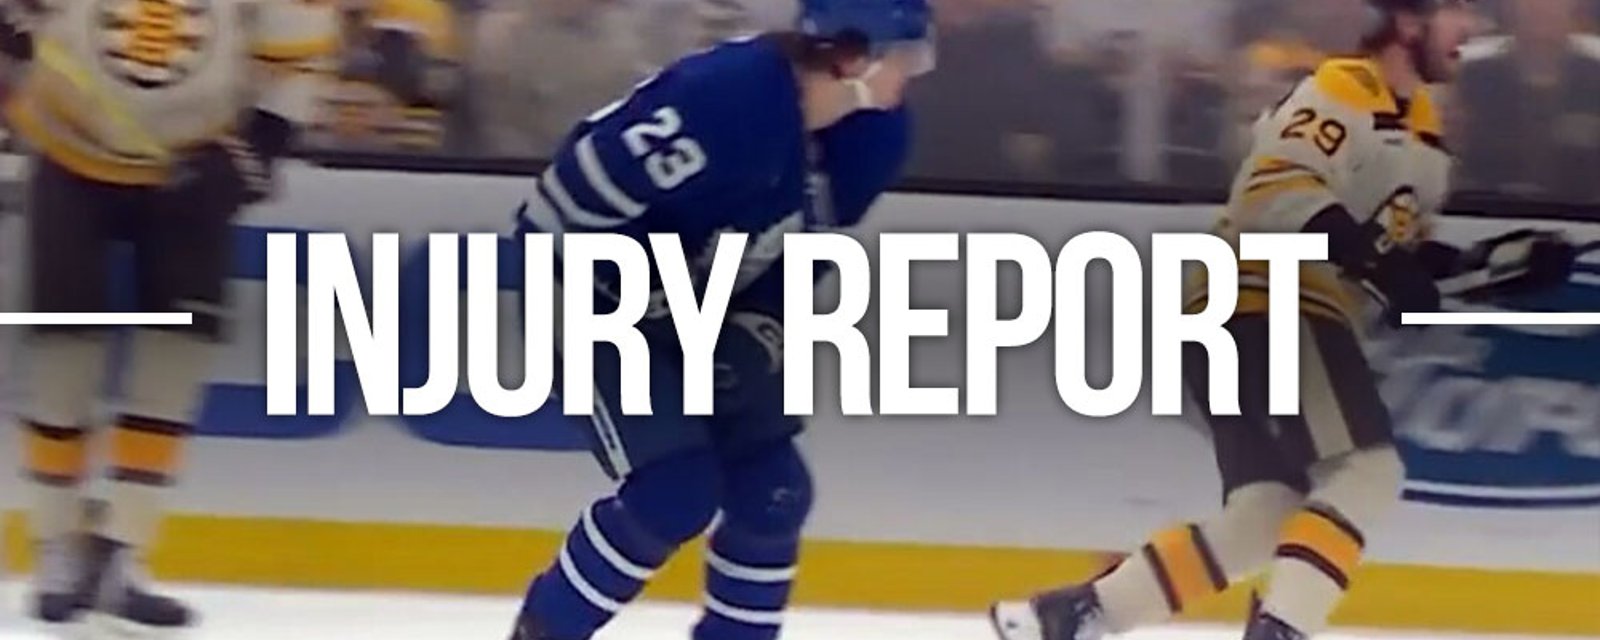 Marchand injures Knies in brutal loss to the Bruins for Leafs